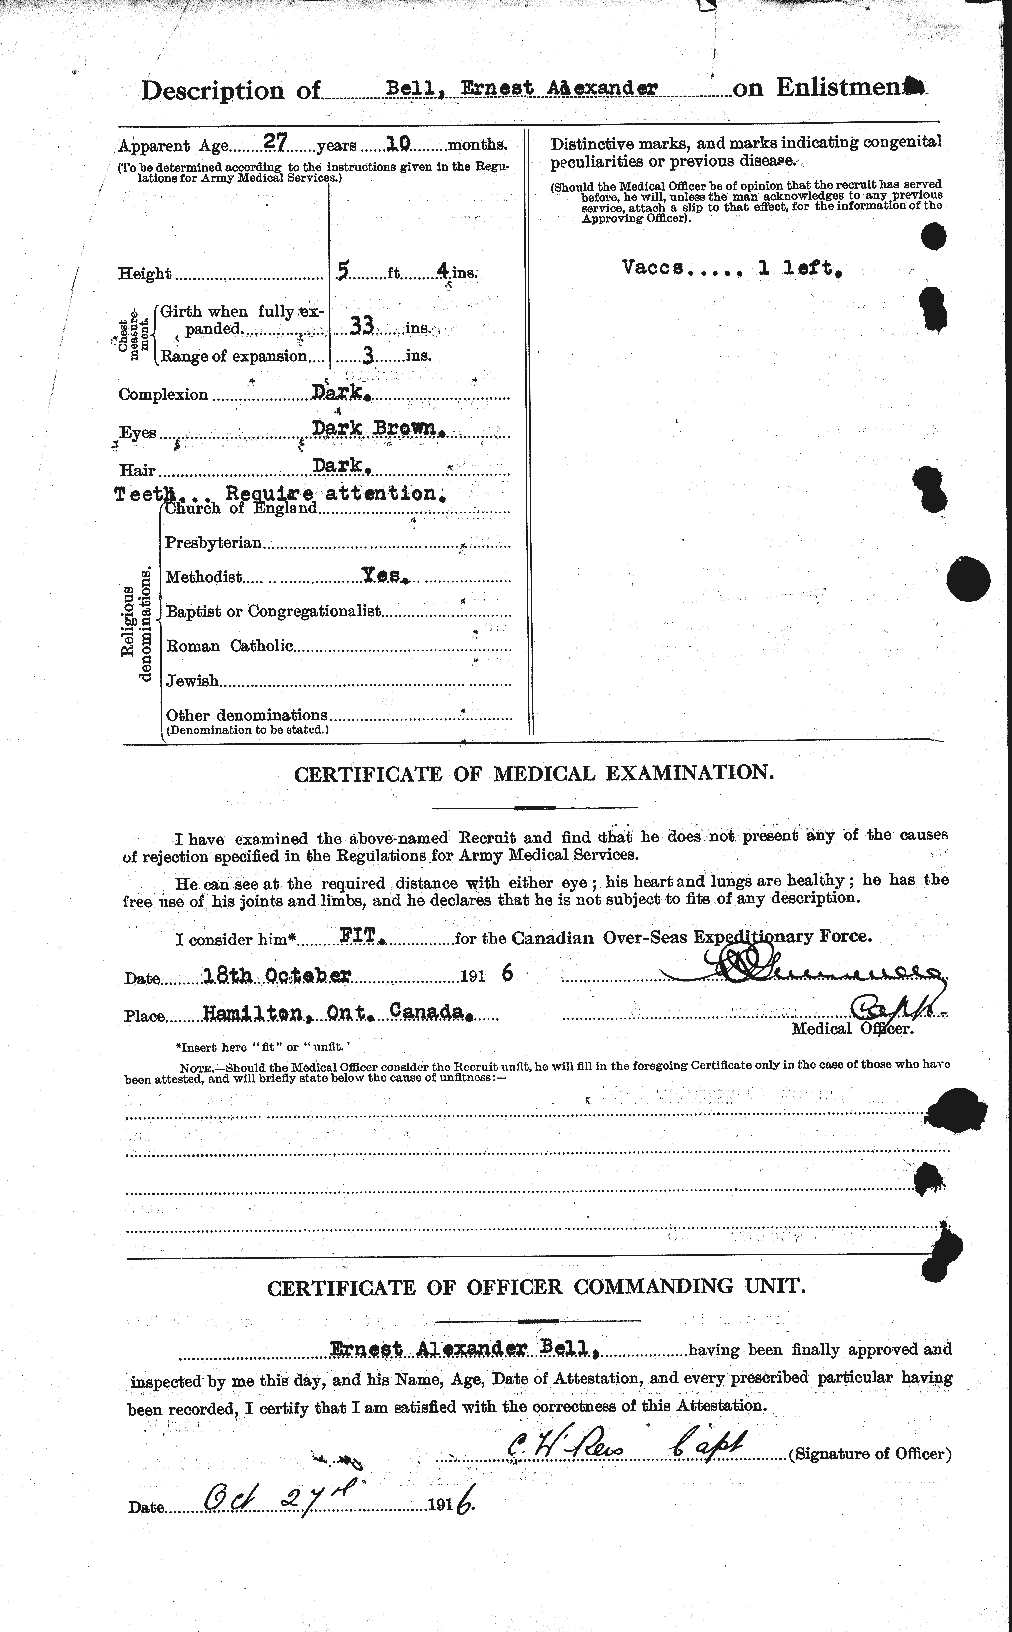 Personnel Records of the First World War - CEF 234069b